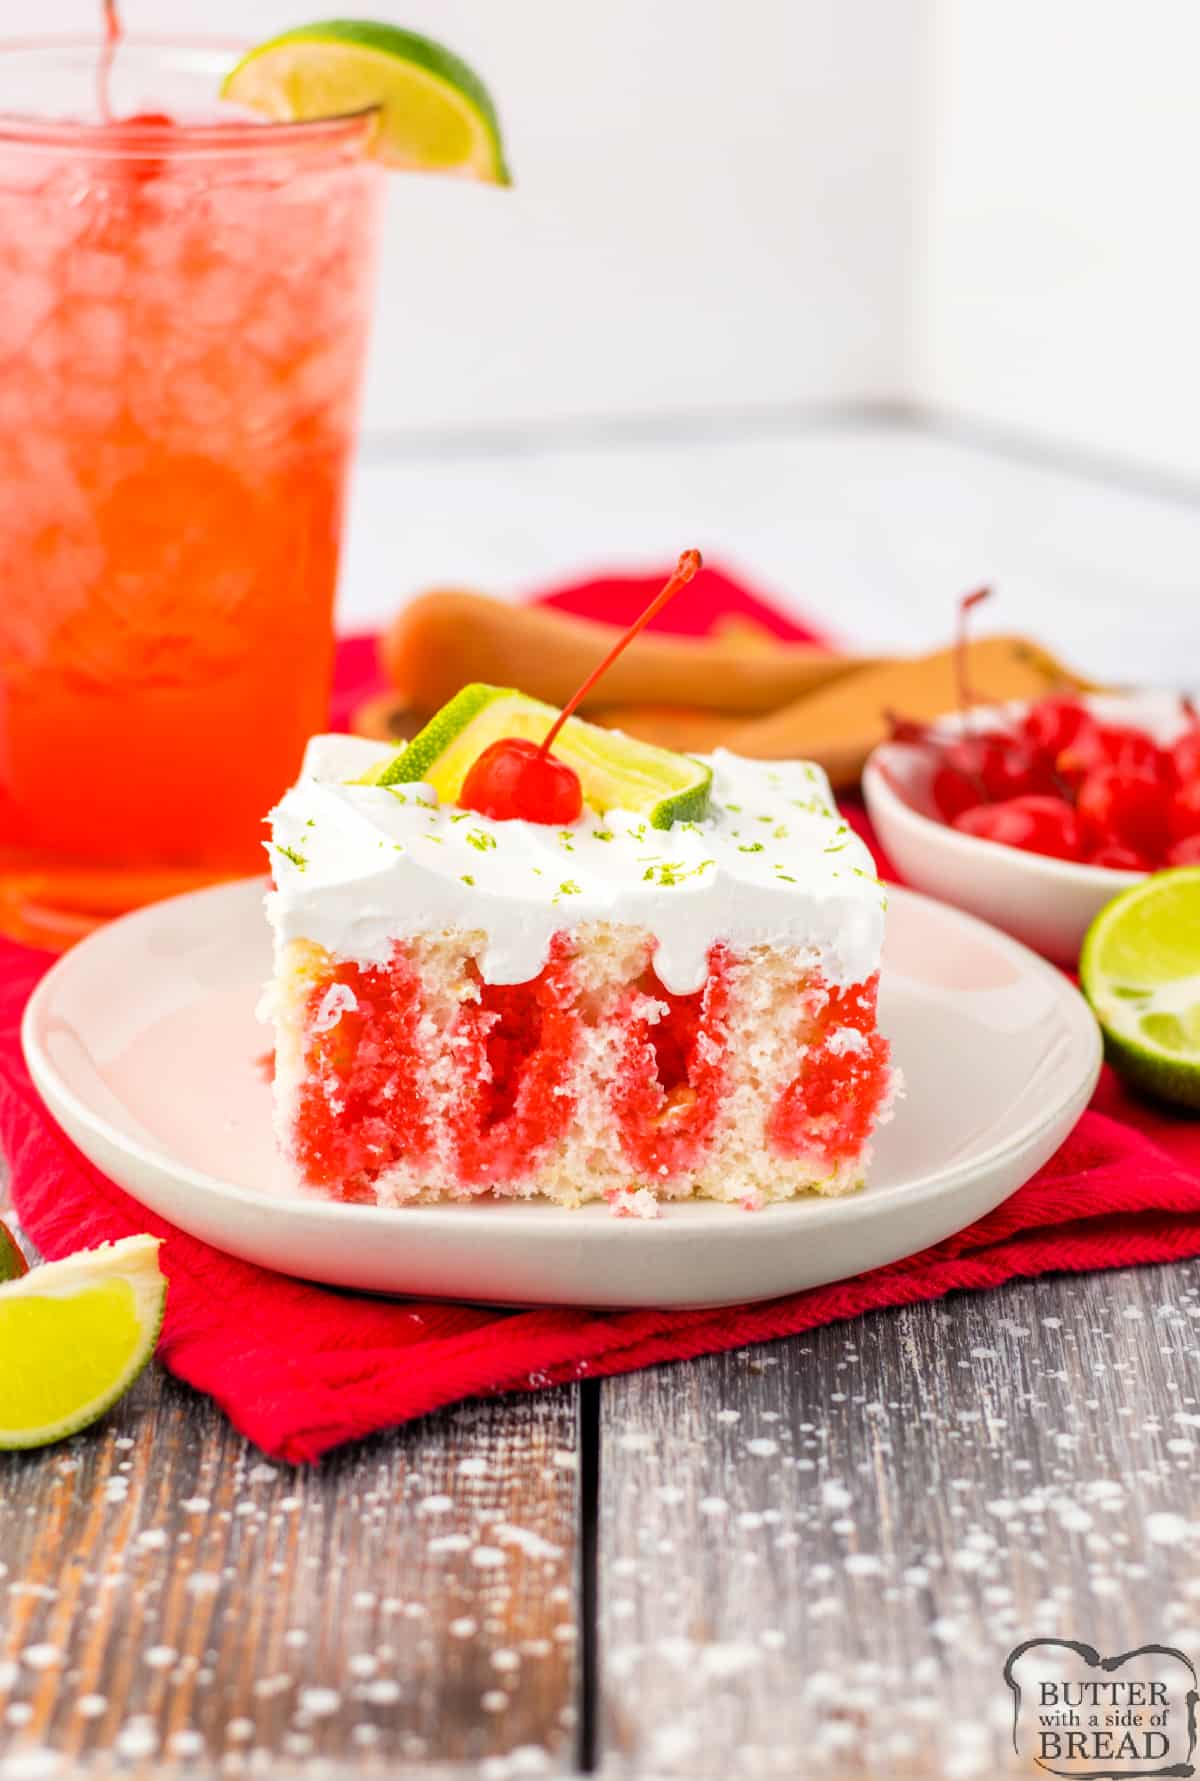 Cherry Limeade Poke Cake is made with cherry jello, whipped cream, lime zest, and maraschino cherries. This cake is cool and refreshing and tastes like a tall, icy glass of cherry limeade. 